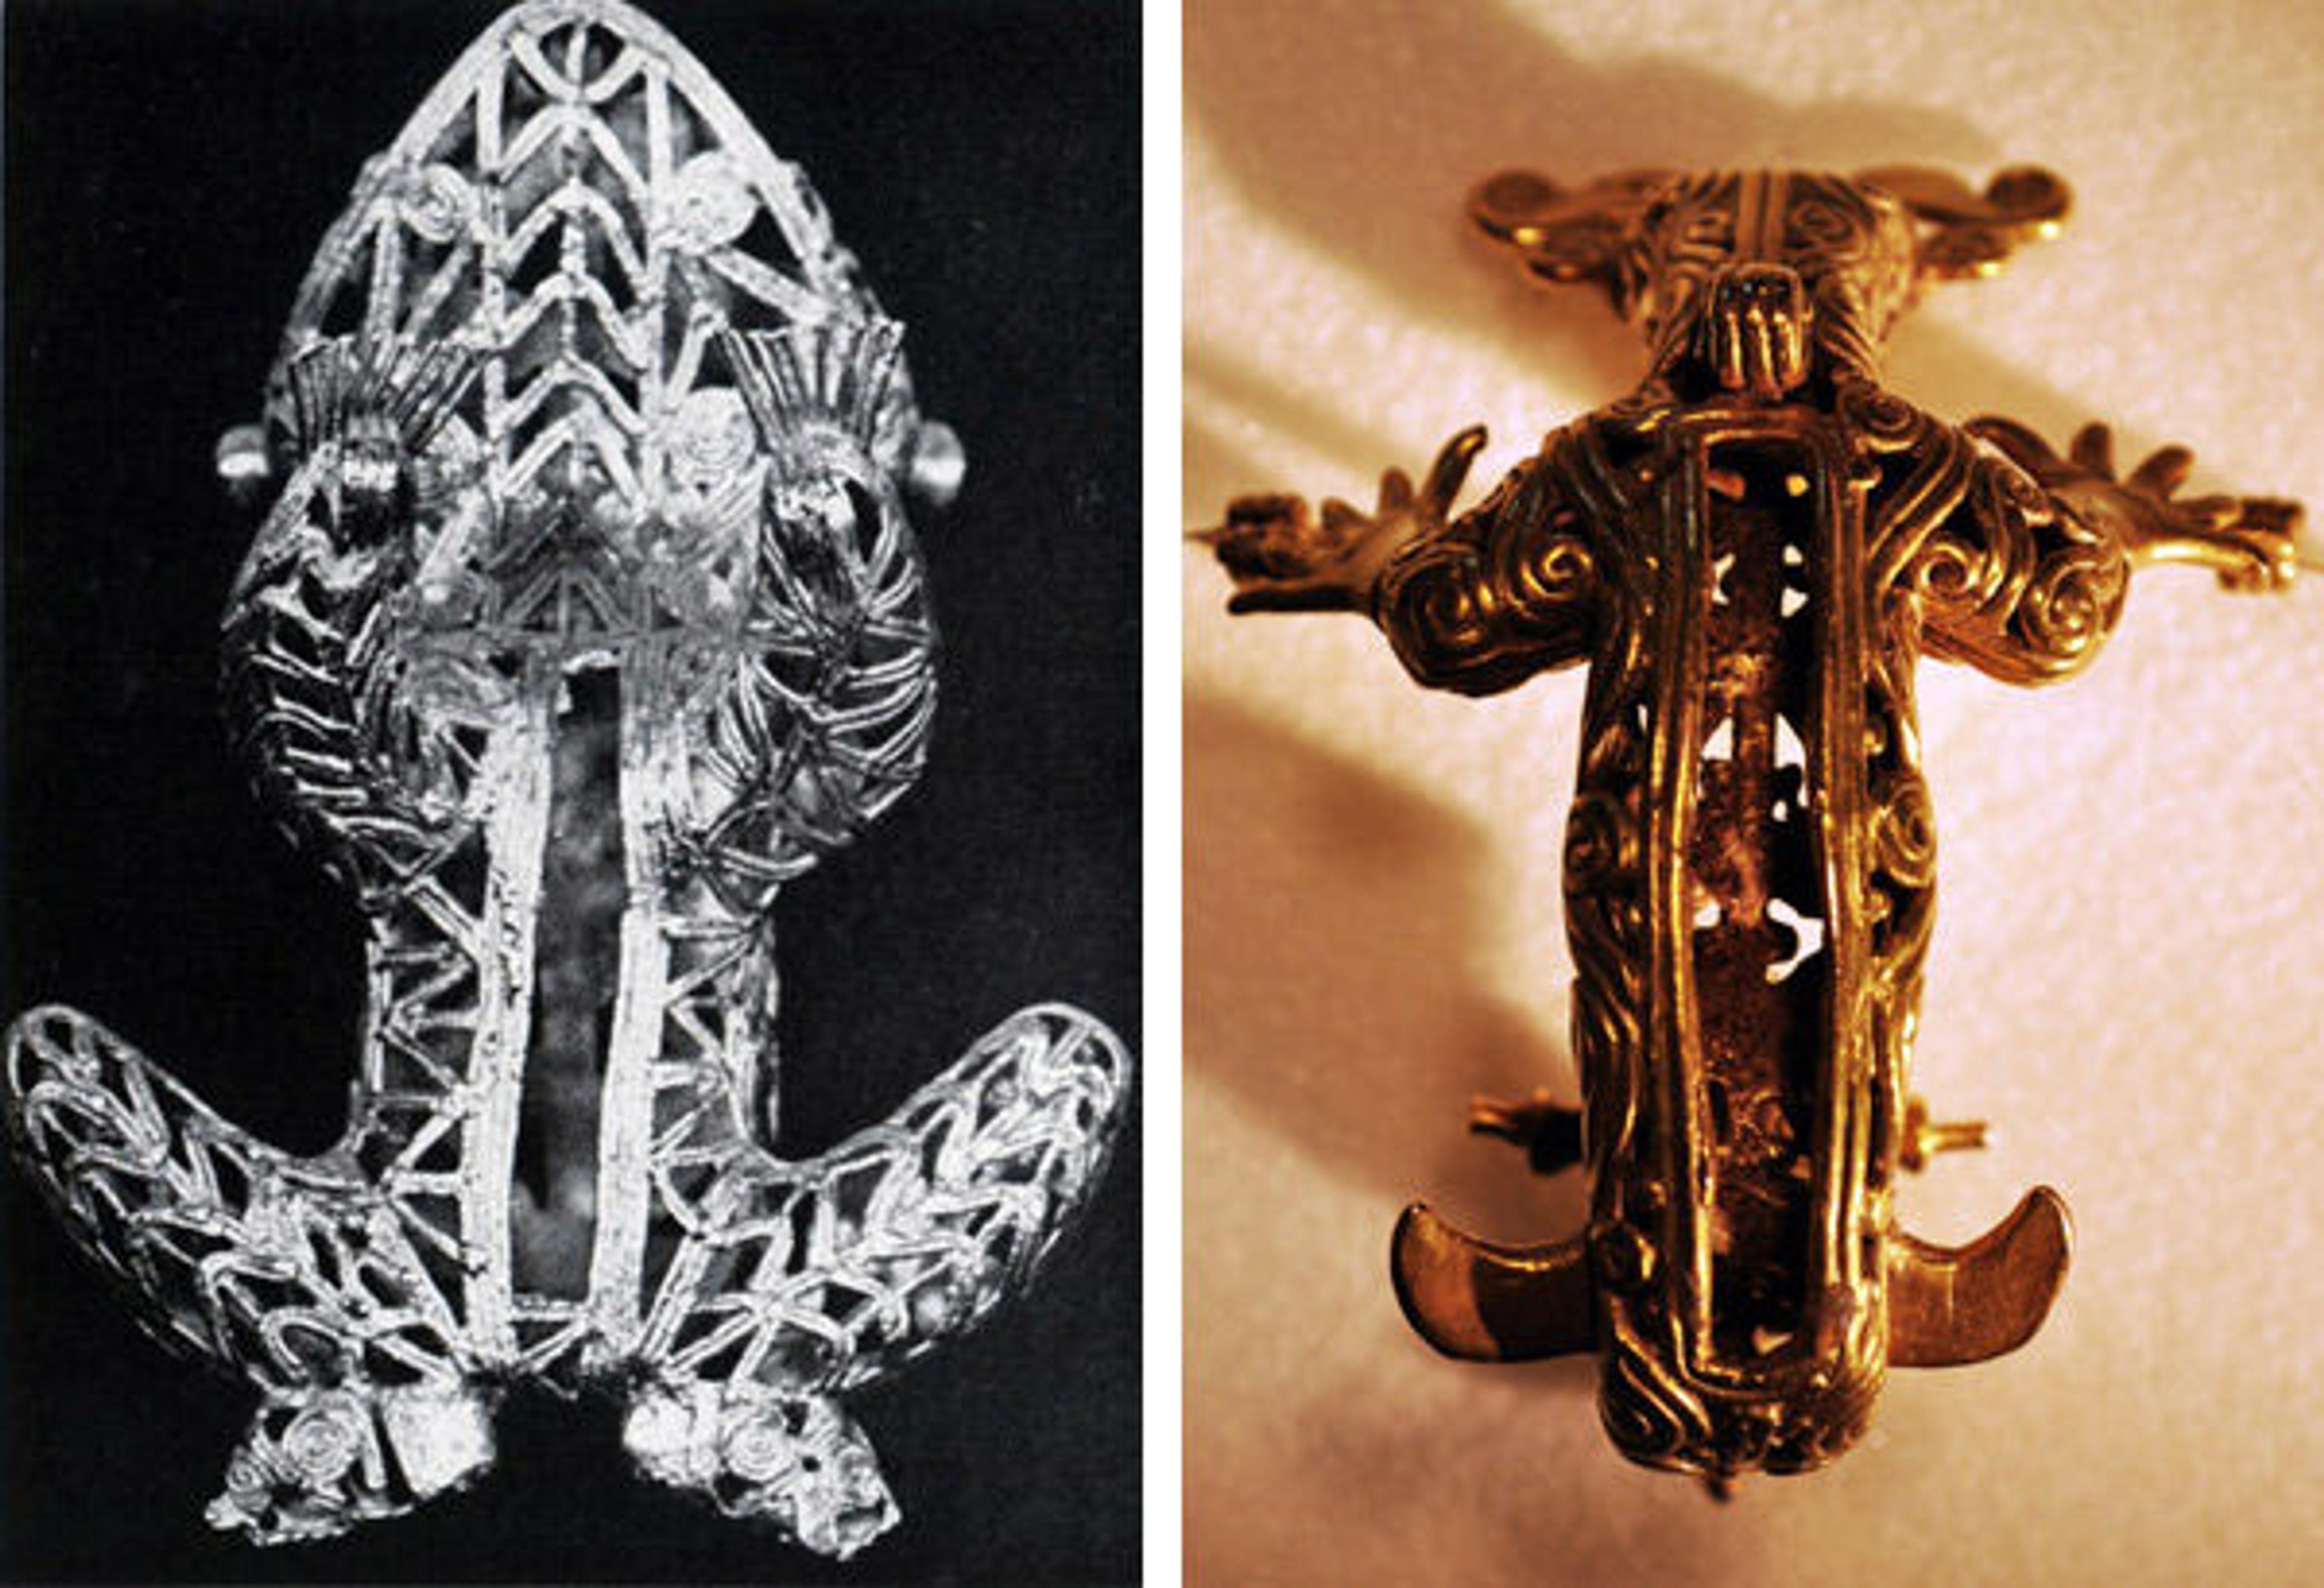 Left: Fig. 6a. Filigree pendant in the form of a frog or toad (underside), A.D. 500/1000. Cast gold; L. 18.26 cm (7 3/16 in.). The Art Institute Chicago, Wirt D. Walker Fund (1969.792); from Lothrop 1956, fig. 7. Right: Fig. 6b. Combined-figure pendant (underside), 700–1000 CE. Coclé, Panama. Gold; H 6.15 x W 5.18 x D 4.13 cm (2 7/16 x 2 1/16 x 1 5/8 in.). Dumbarton Oaks Research Library and Collection, Washington, D.C., Pre-Columbian Collection (PC.B.372)